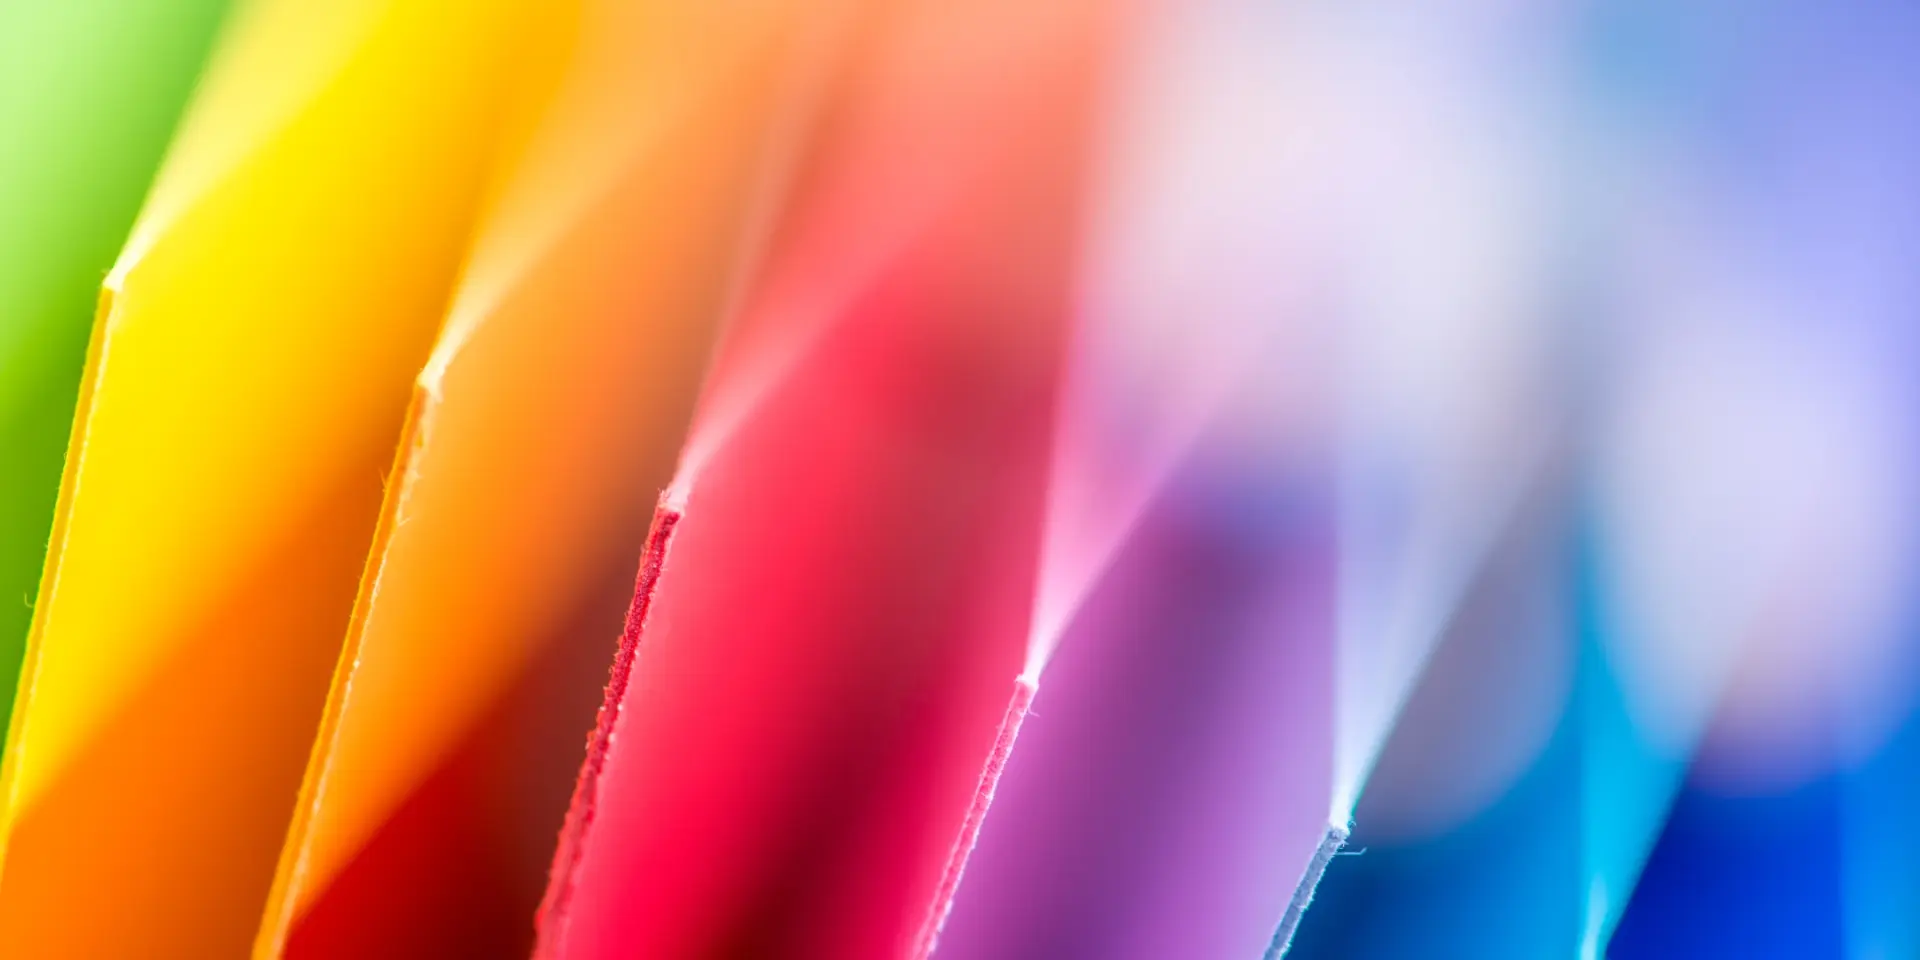 Abstract image showing different colors.